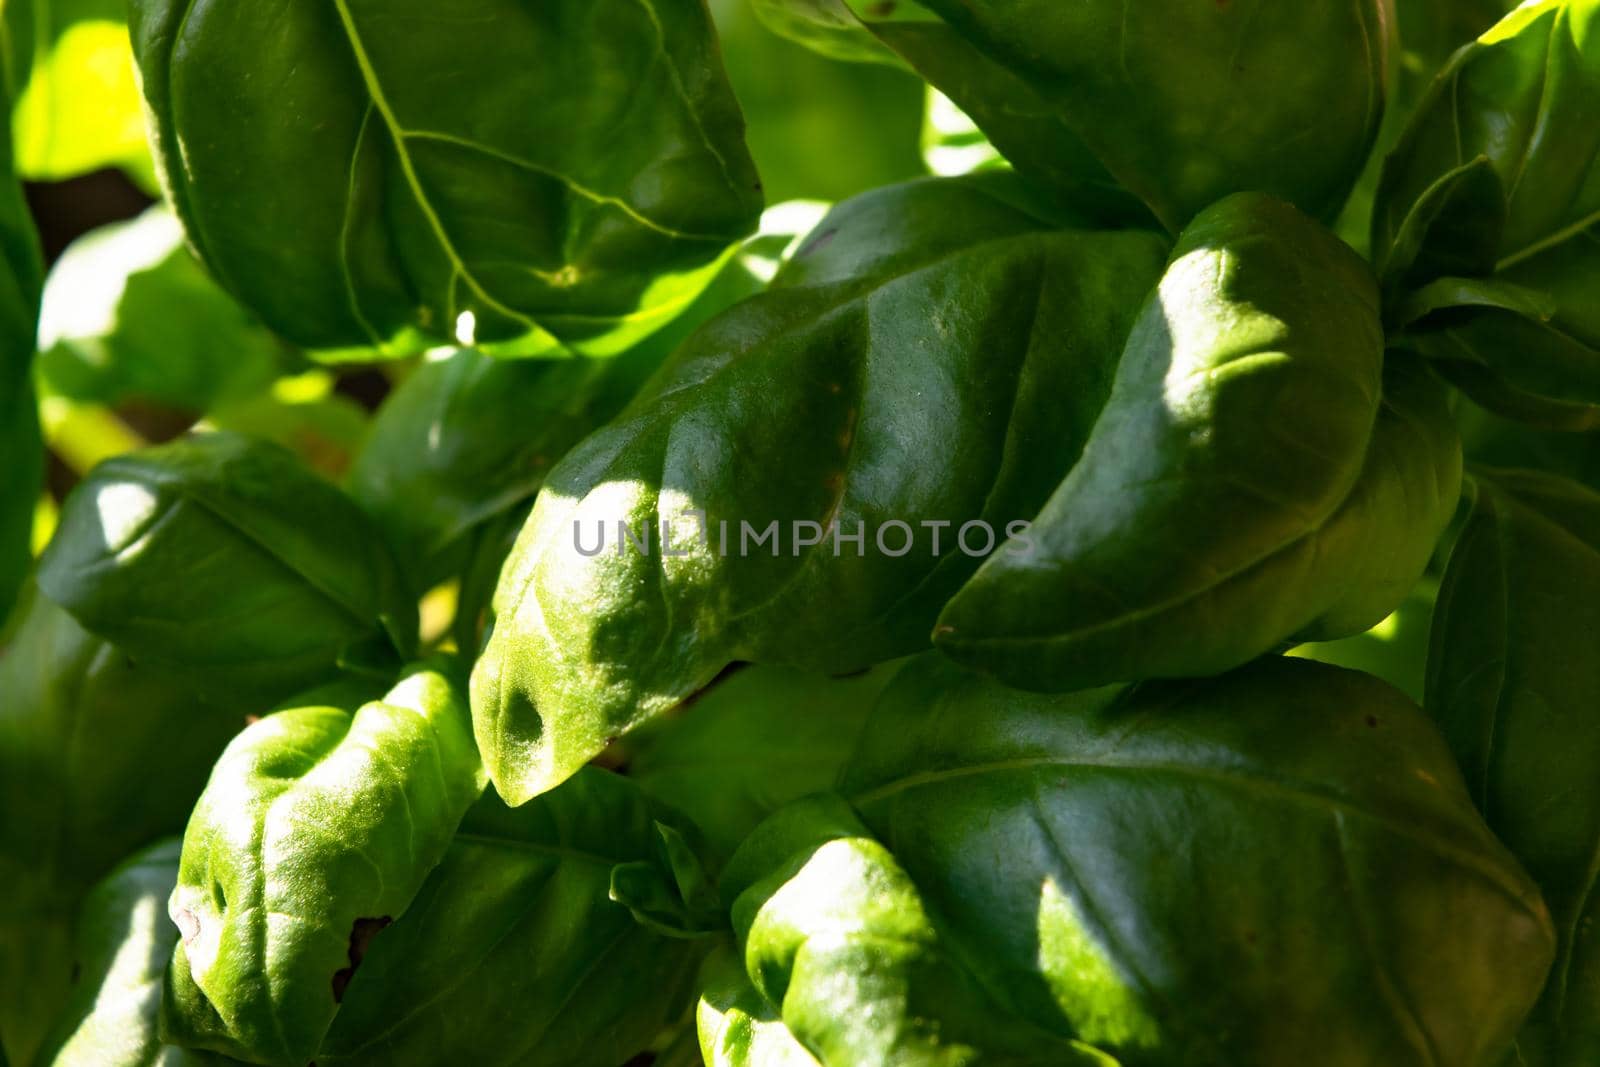 Close-up of a wonderful plant of basil, with its characteristic colorful leaves.